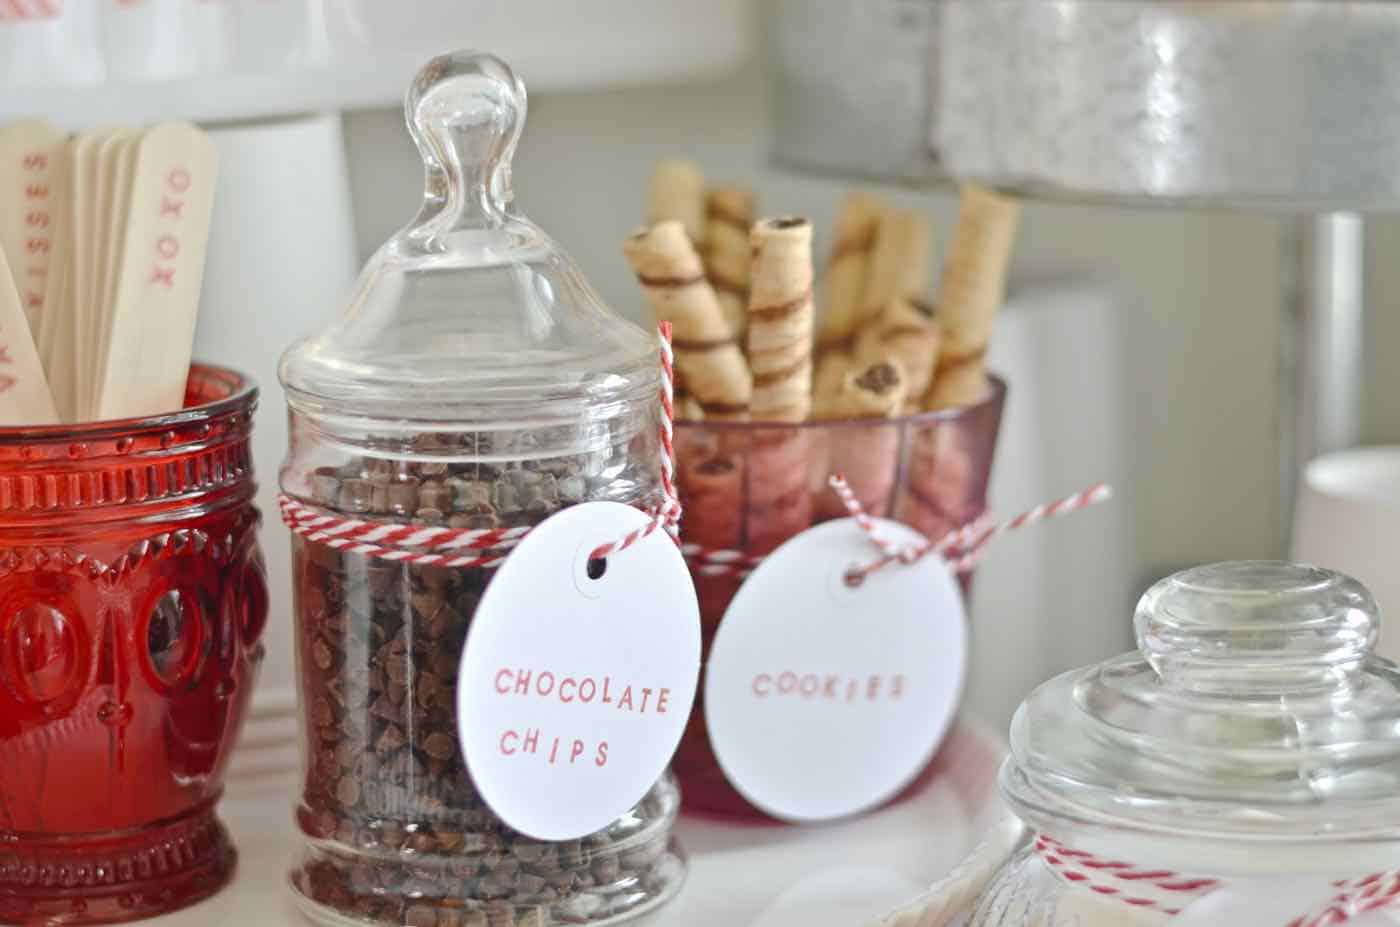 Make your own sweet and decadent DIY hot chocolate station.